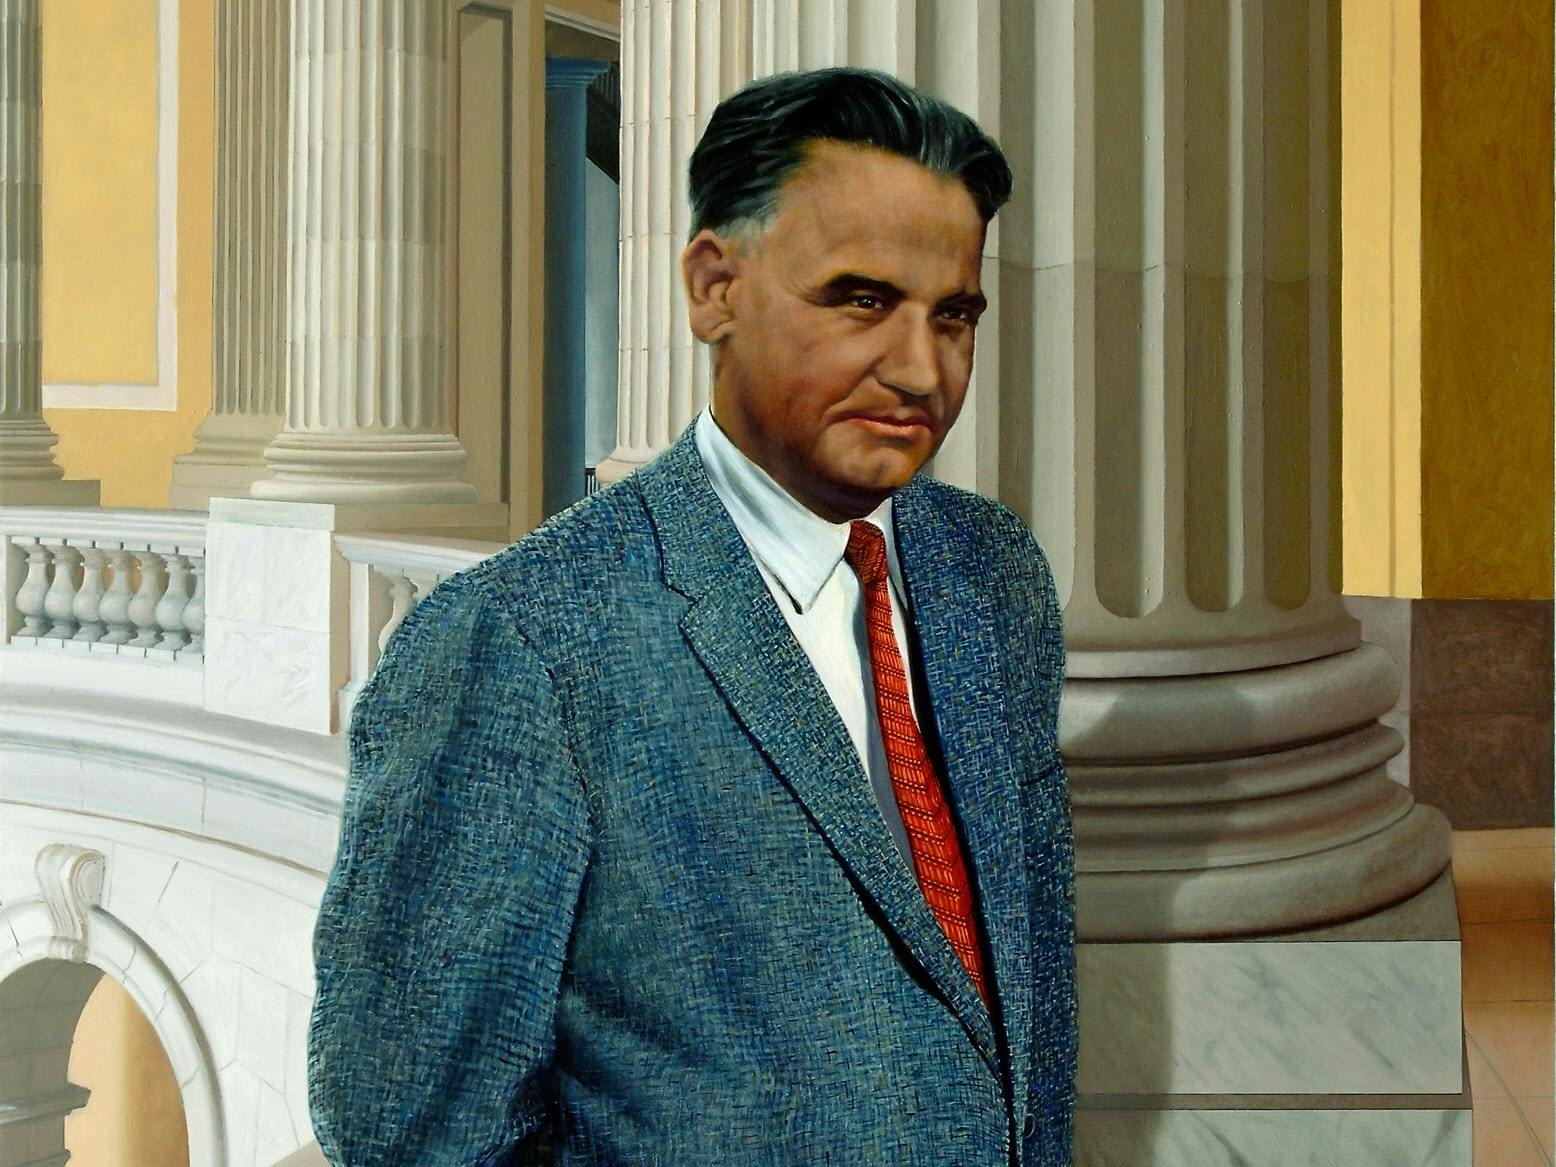 Oil on canvas, Jon R. Friedman, 2007 Collection of the U.S. House of Representatives (Wikimedia Commons)